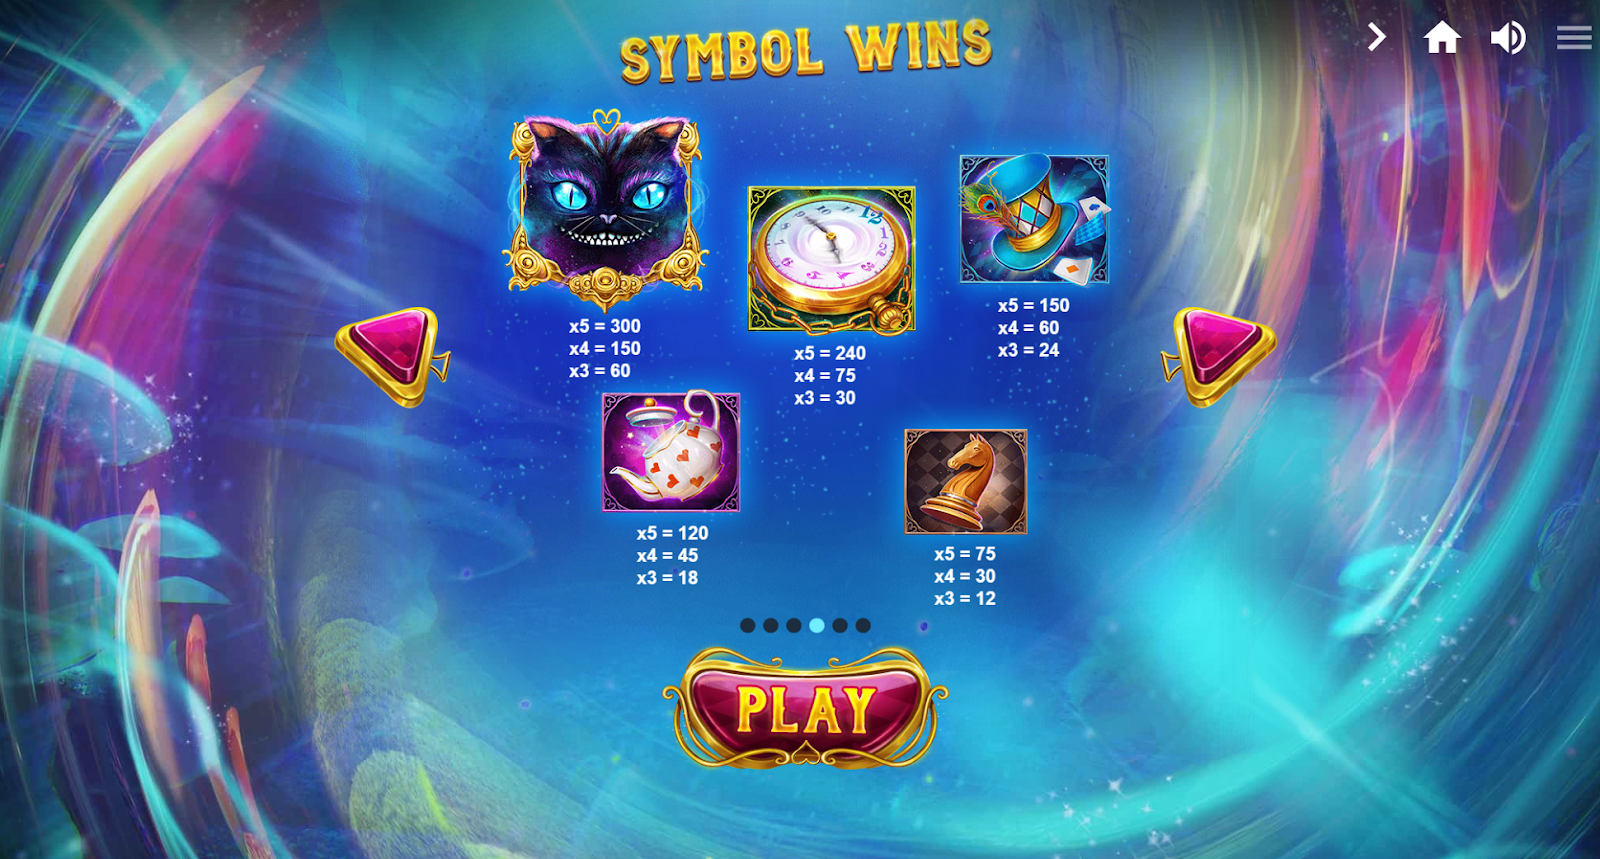 The Wild Hatter is a slot game win some interesting symbol wins 